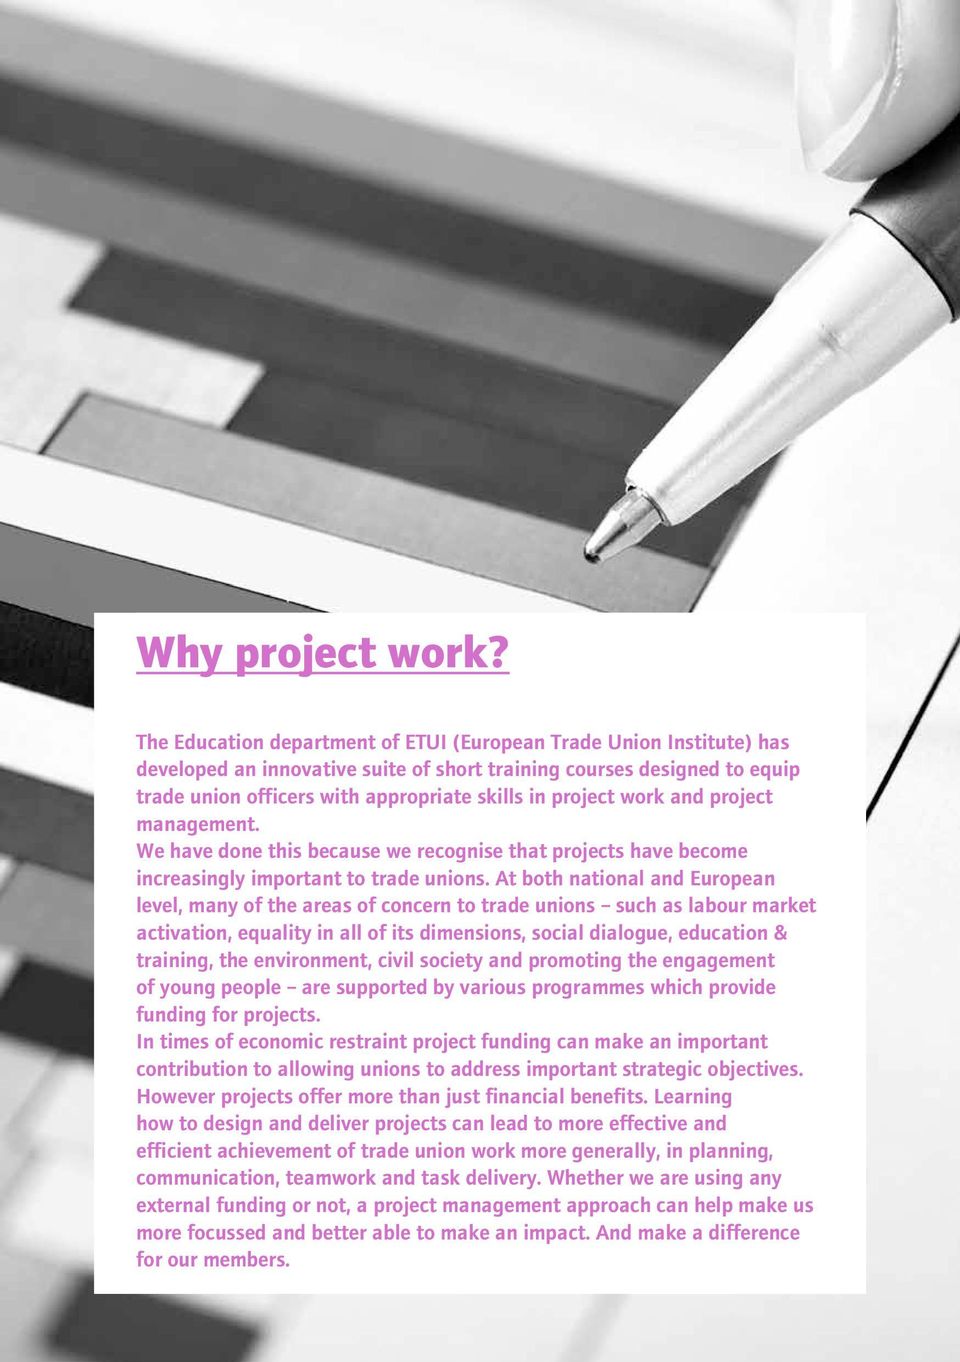 work and project management. We have done this because we recognise that projects have become increasingly important to trade unions.